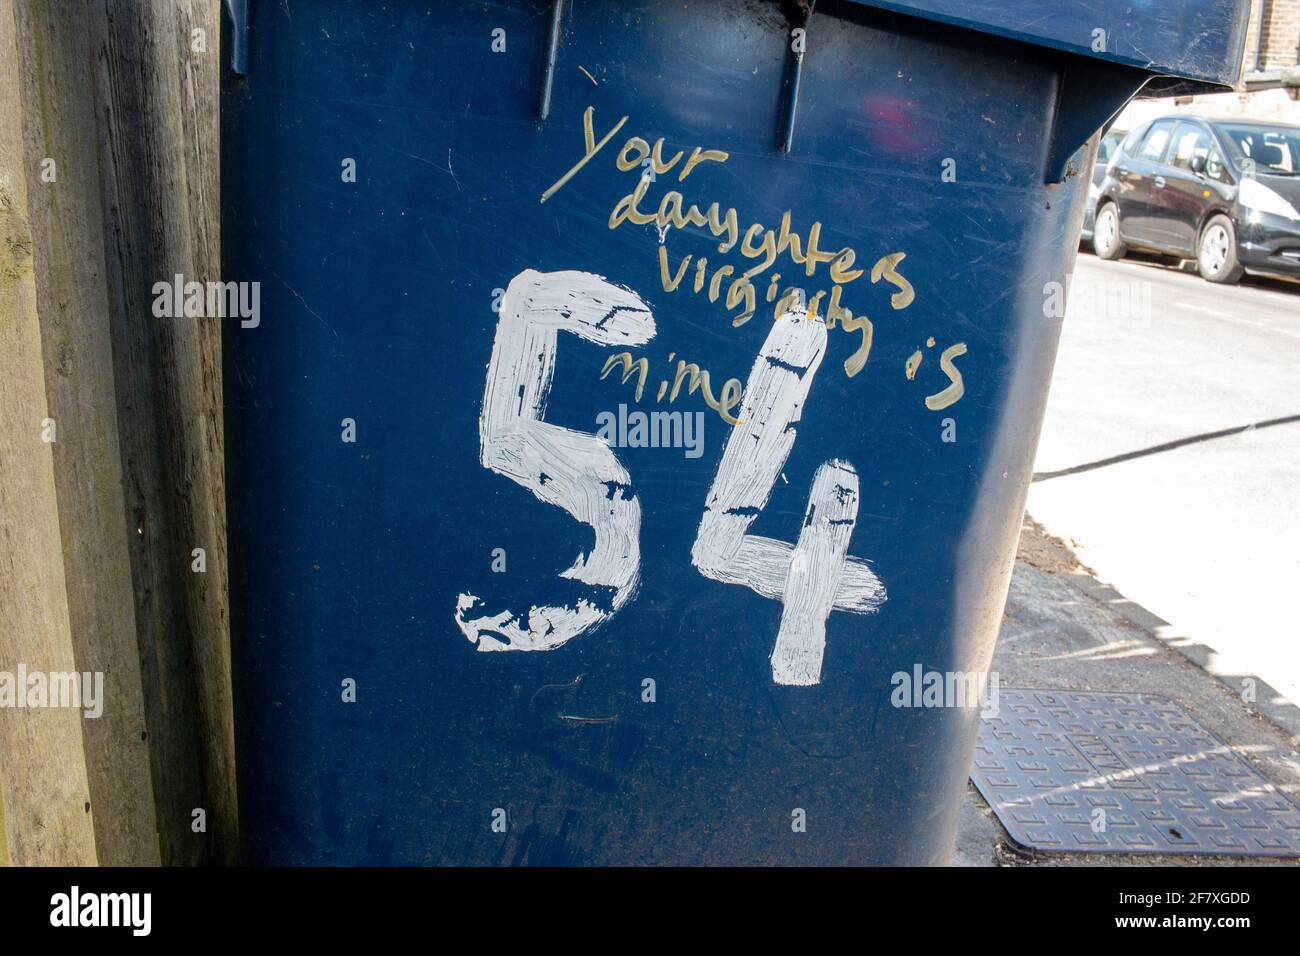 Your Daughter's Virginity Is Mime  -  Misspelled graffiti on a blue wheely bin belonging to house number 54.  Romsey, Cambridge, UK. Stock Photo